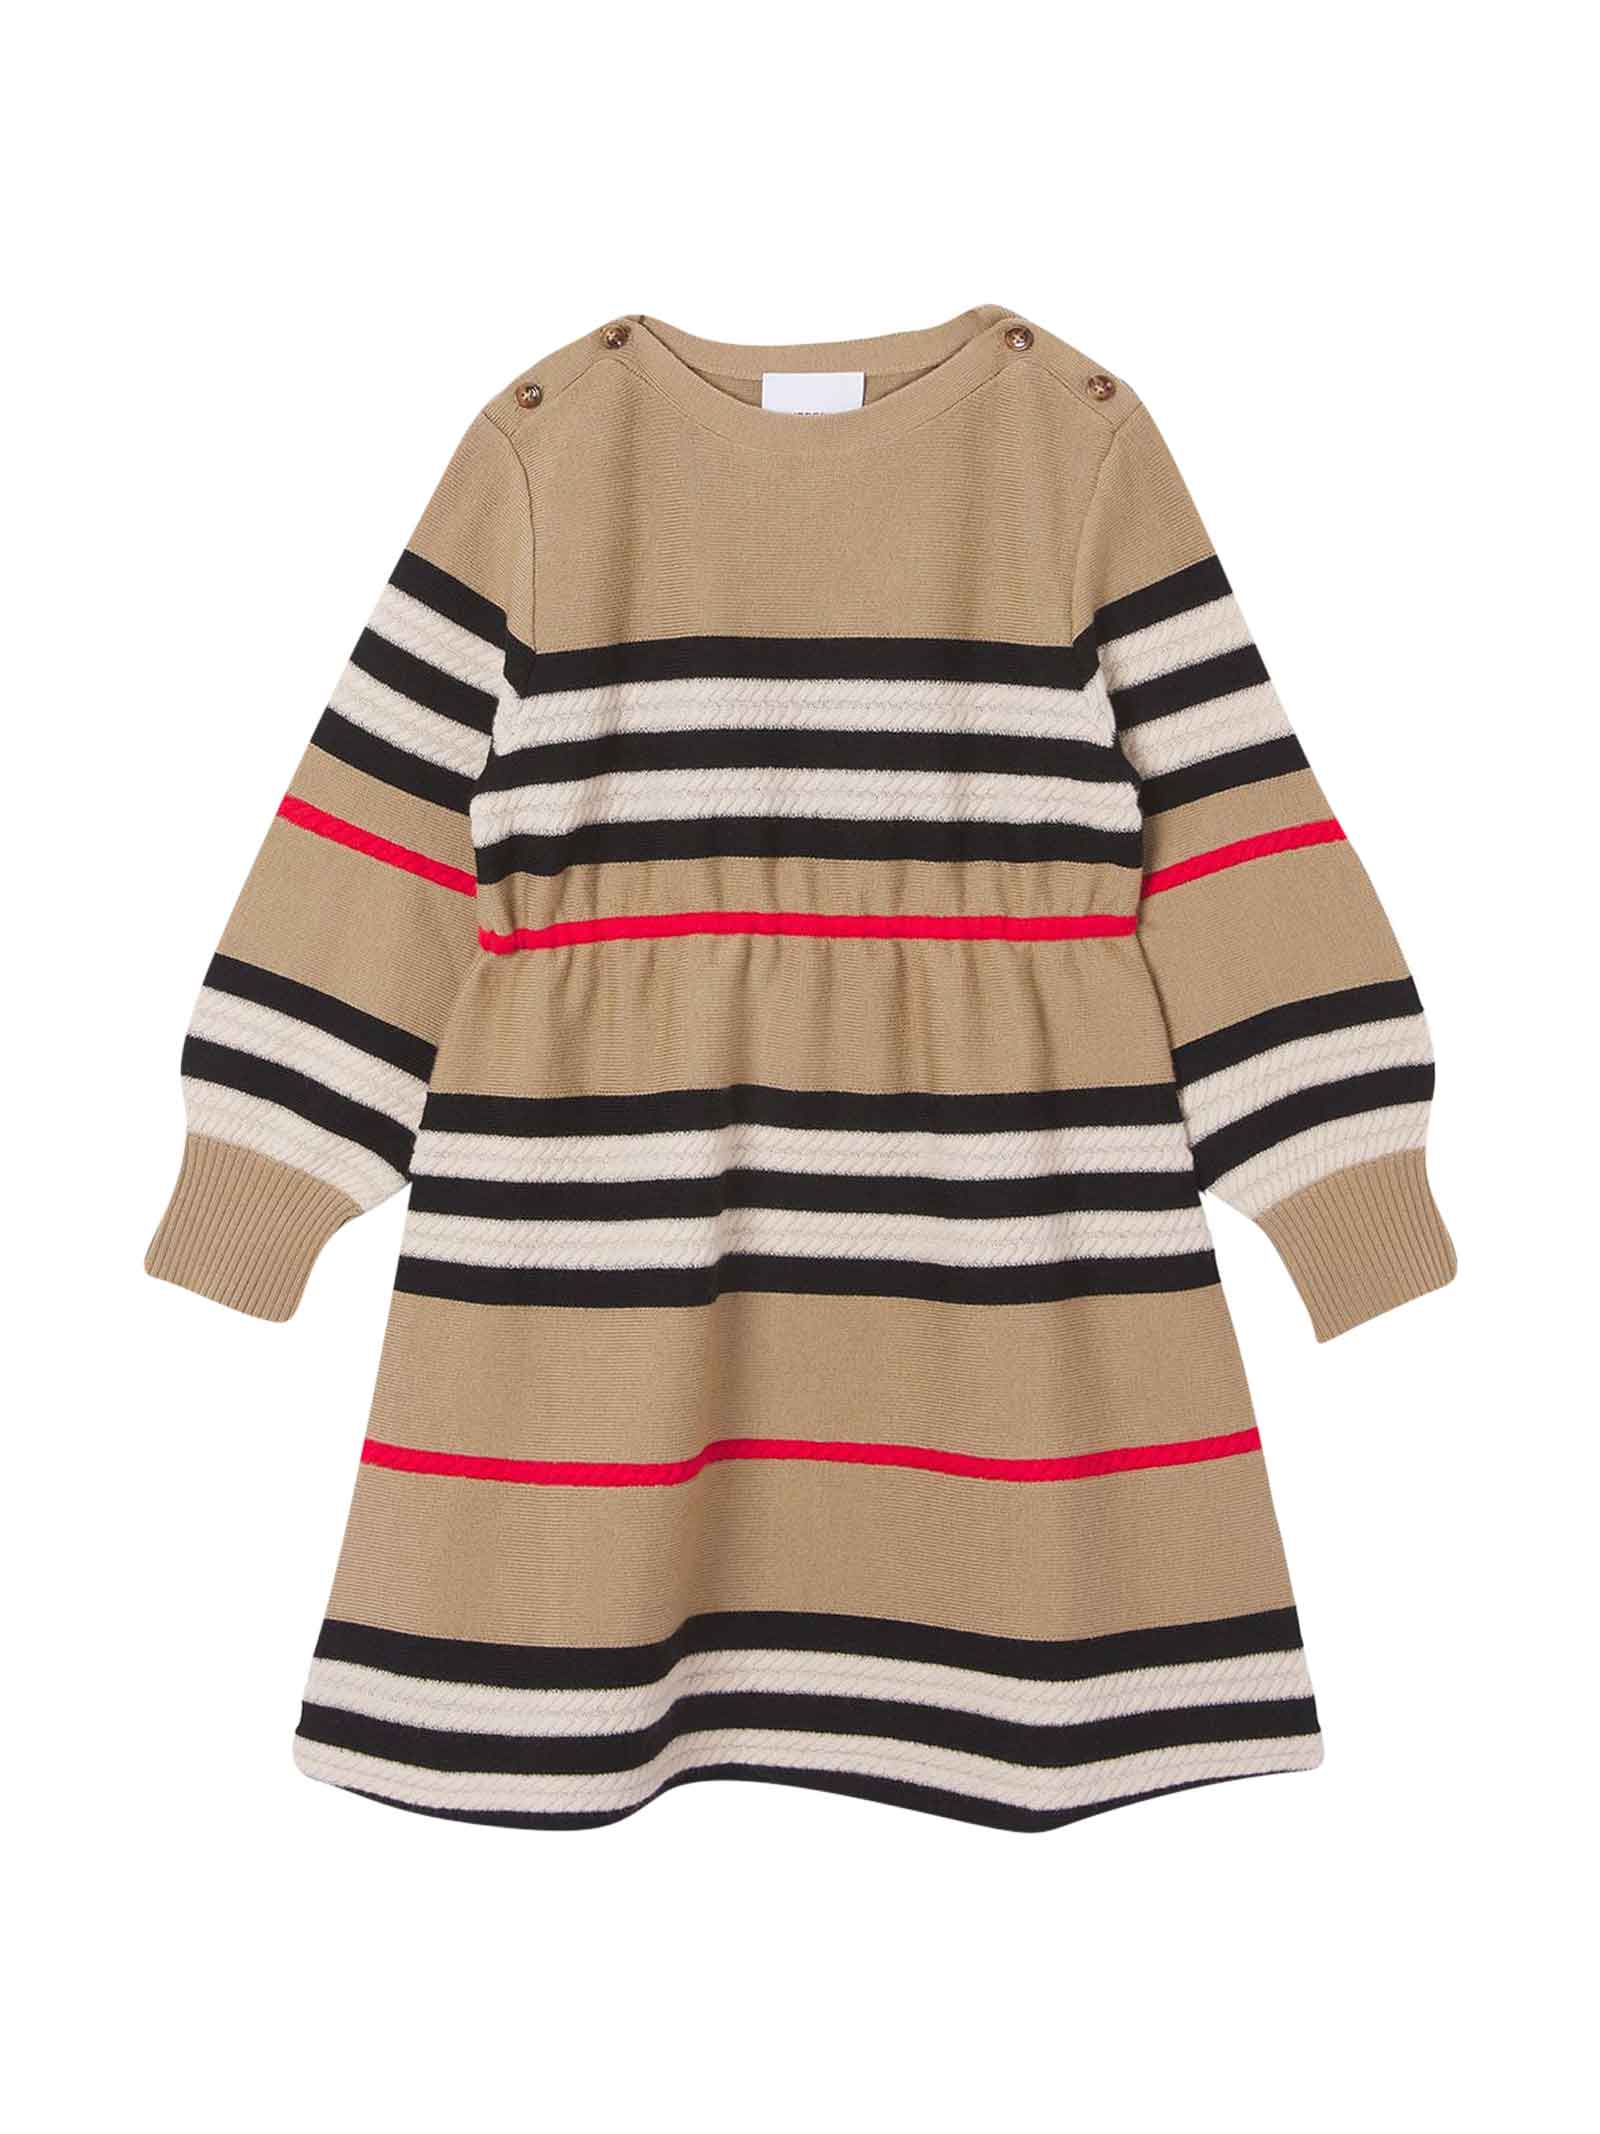 Burberry Beige Dress With Iconic Striped Pattern